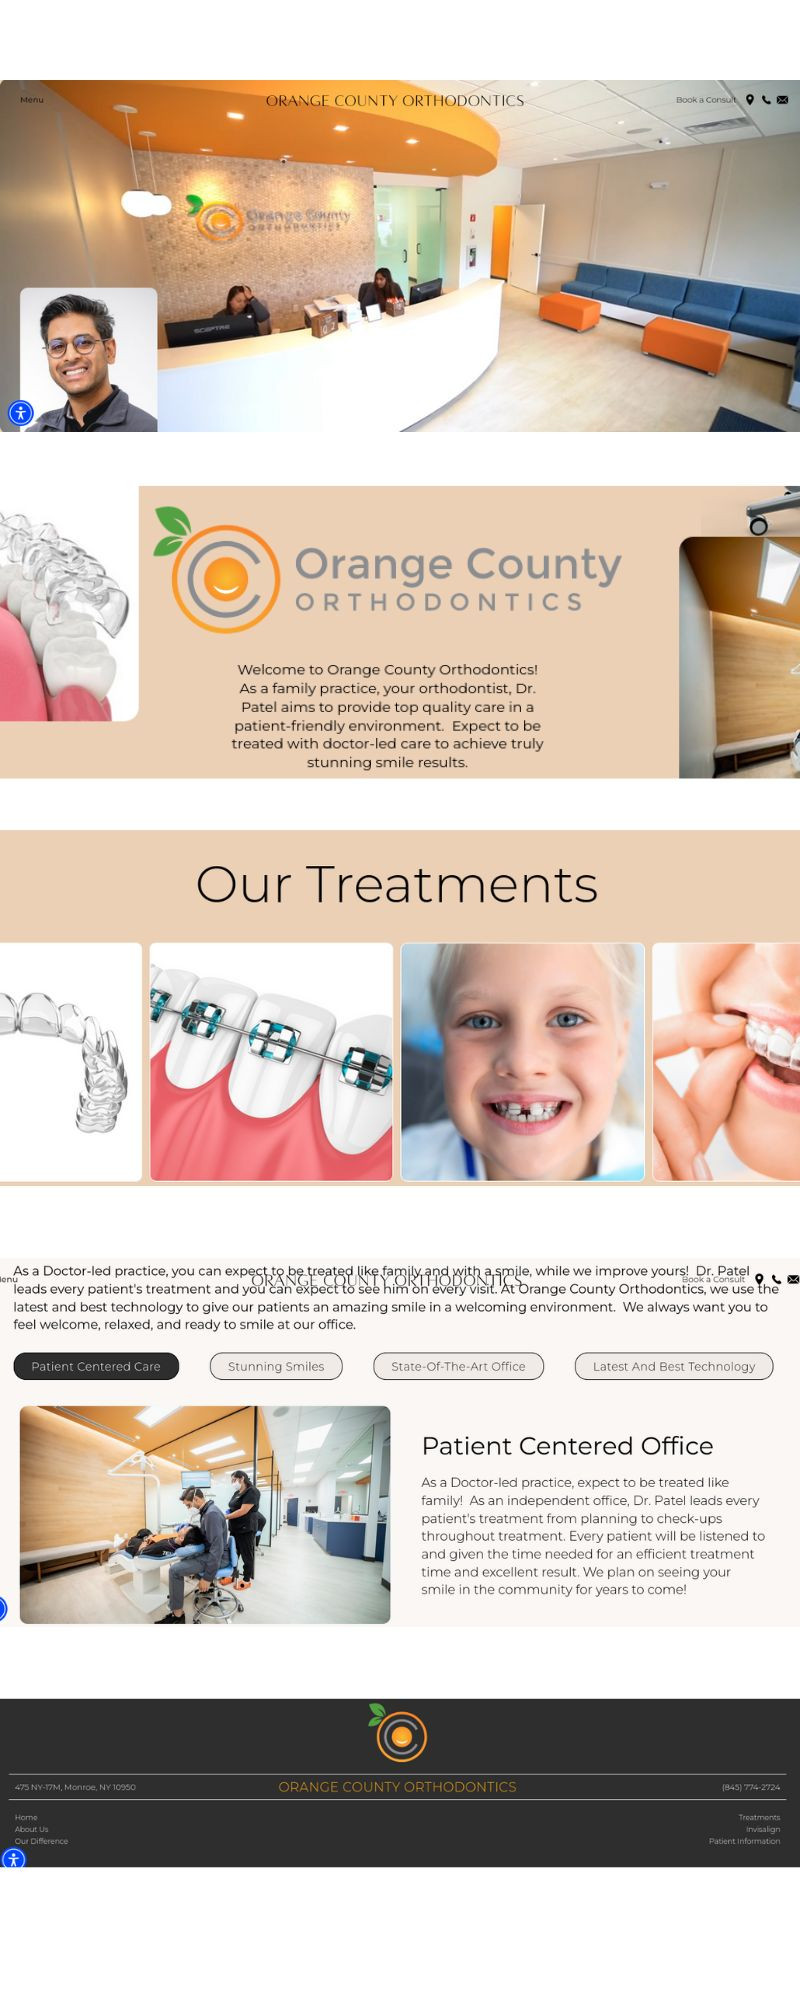 Invisalign Clear Braces in Middletown - Gifyu